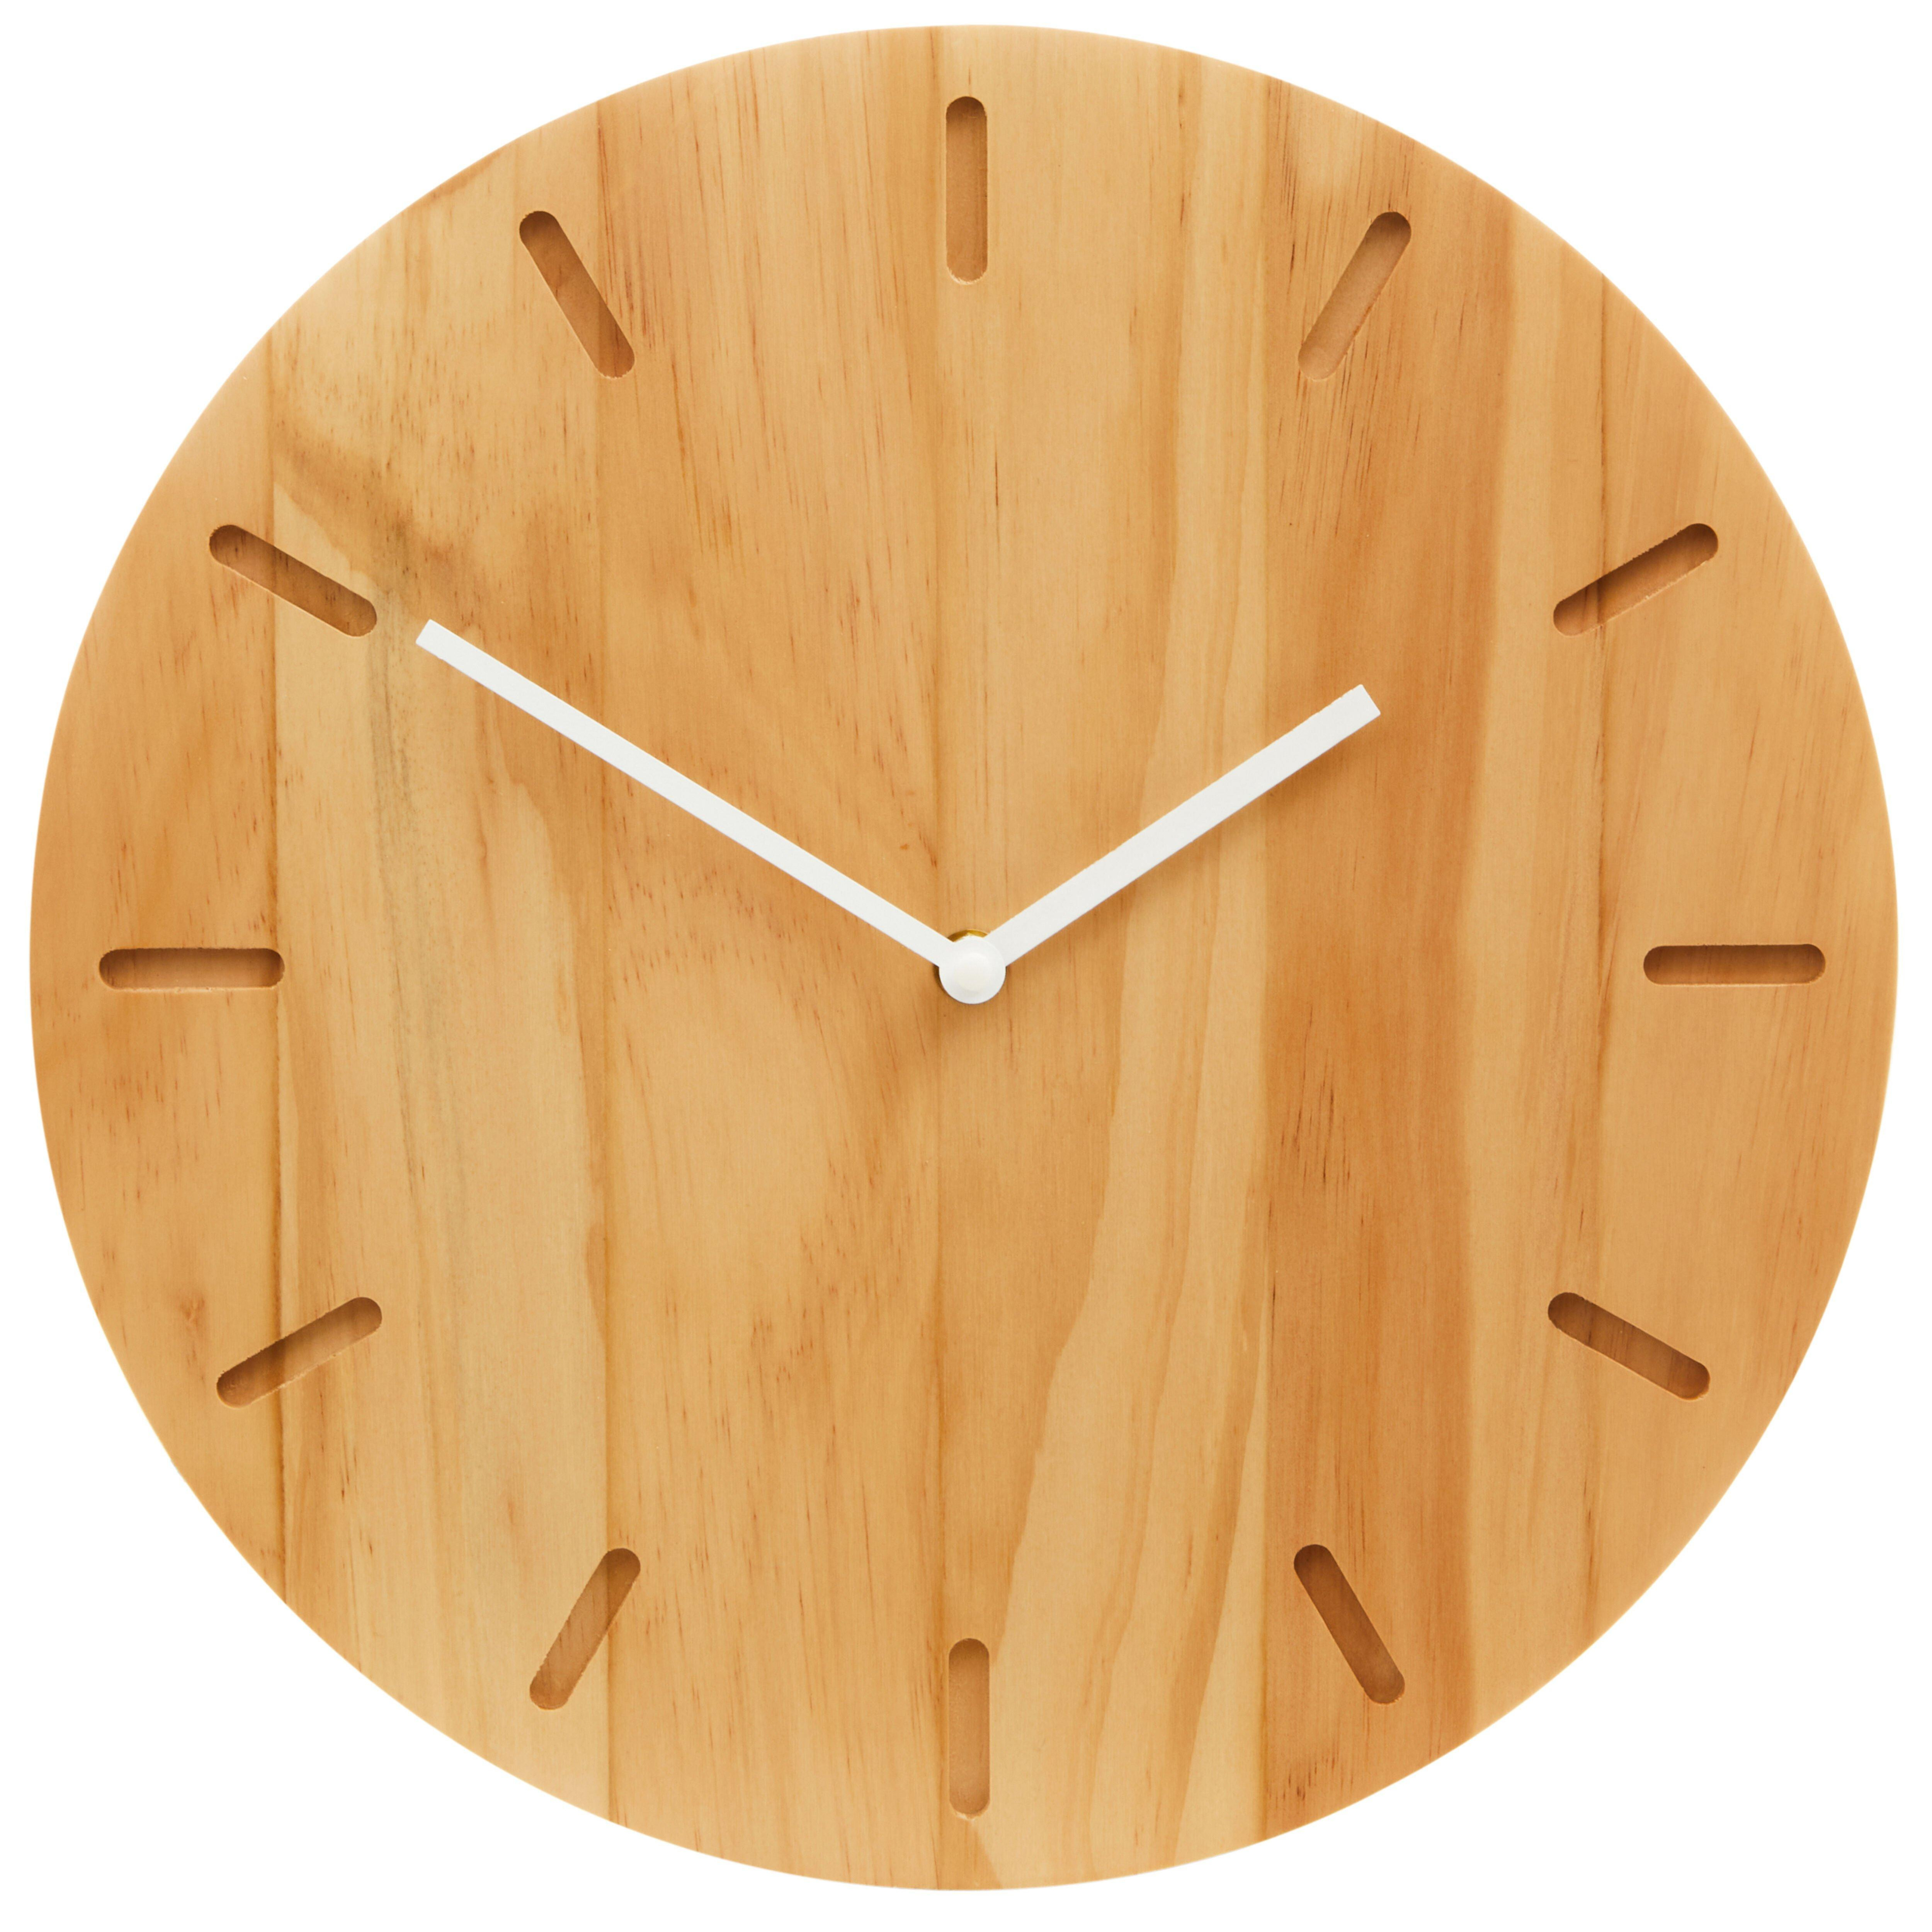 Rustic Natural Wood Effect Wall Clock, Contemporary Wall Clock, Precised Time keeping  Wall Clock For Outdoor - image 1